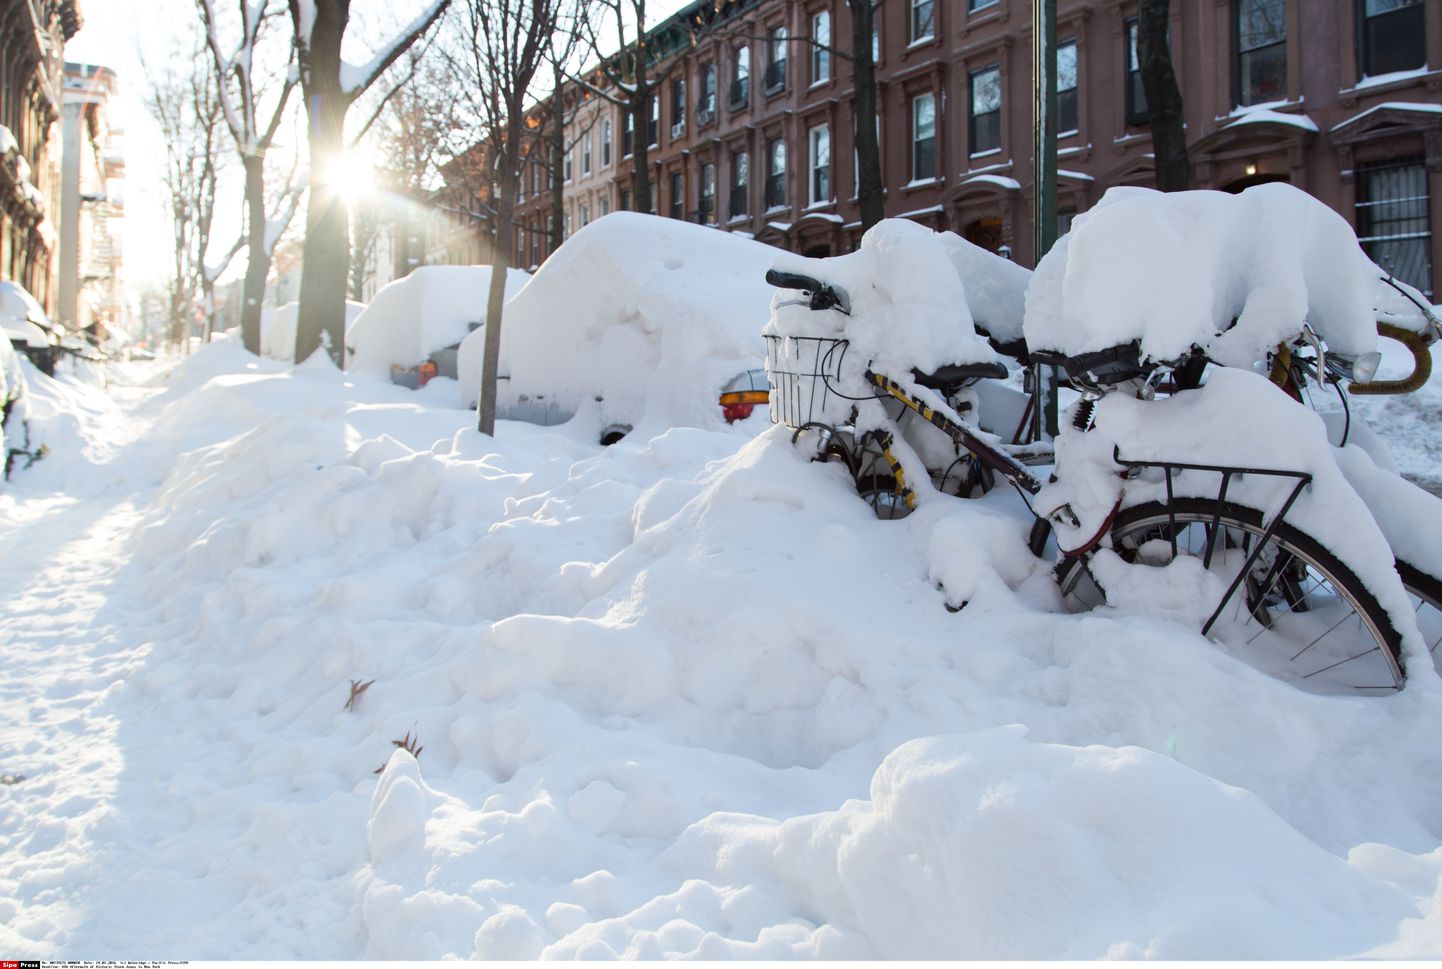 Winter storm Jonas burries New York recorded as the second biggest Snow storm in New York City history. (Photo by Louise Wateridge / Pacific Press)/PACIFICPRESS_1300.0477/Credit:Wateridge / Pacific Press/SIPA/1601251351